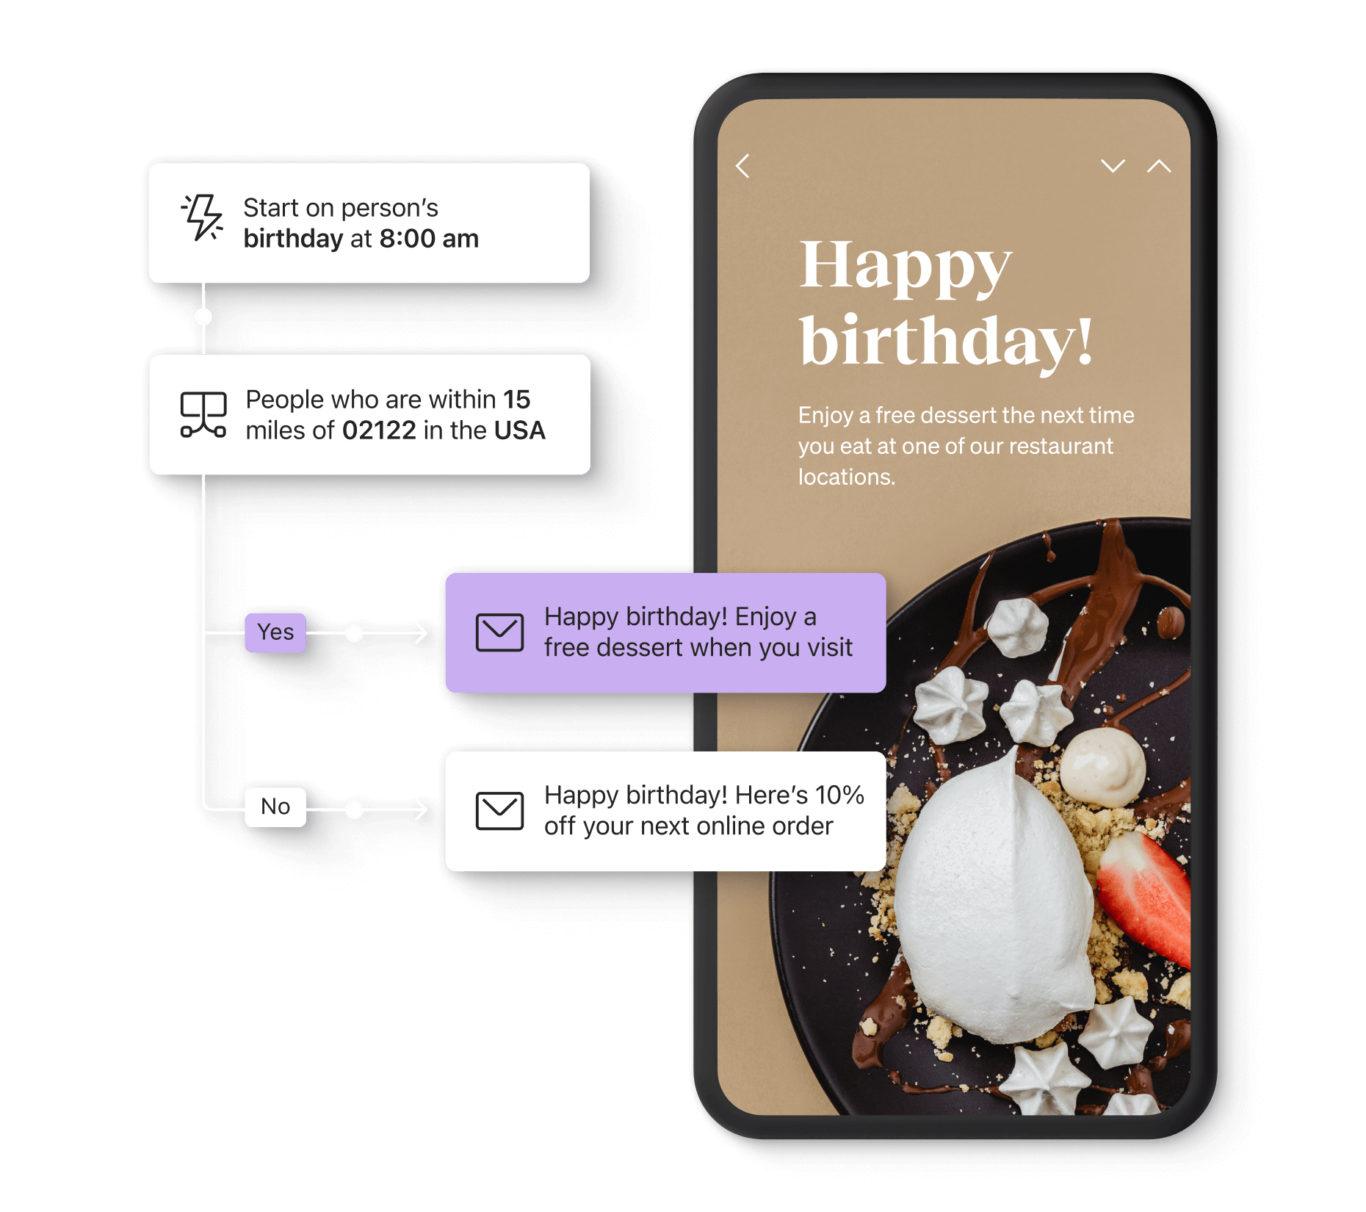 A Klaviyo flow that automates a birthday email for people within 15 miles of a specific zip code. An email promoting a free dessert.